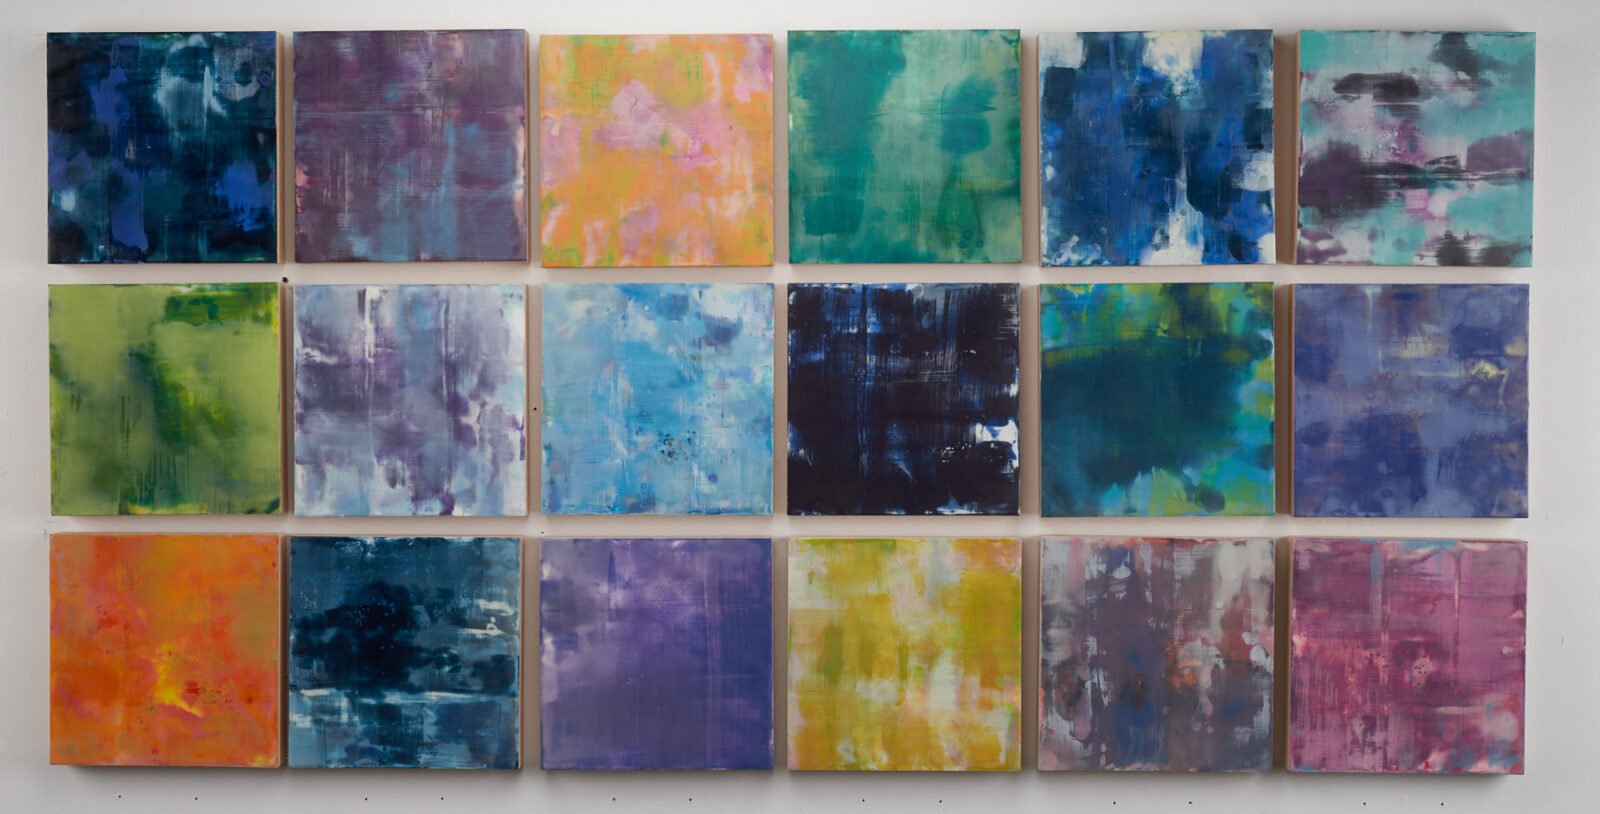 Emily Mann, Ink and Indigo, Overtone Series | encaustic on panel, 12" x 12" each